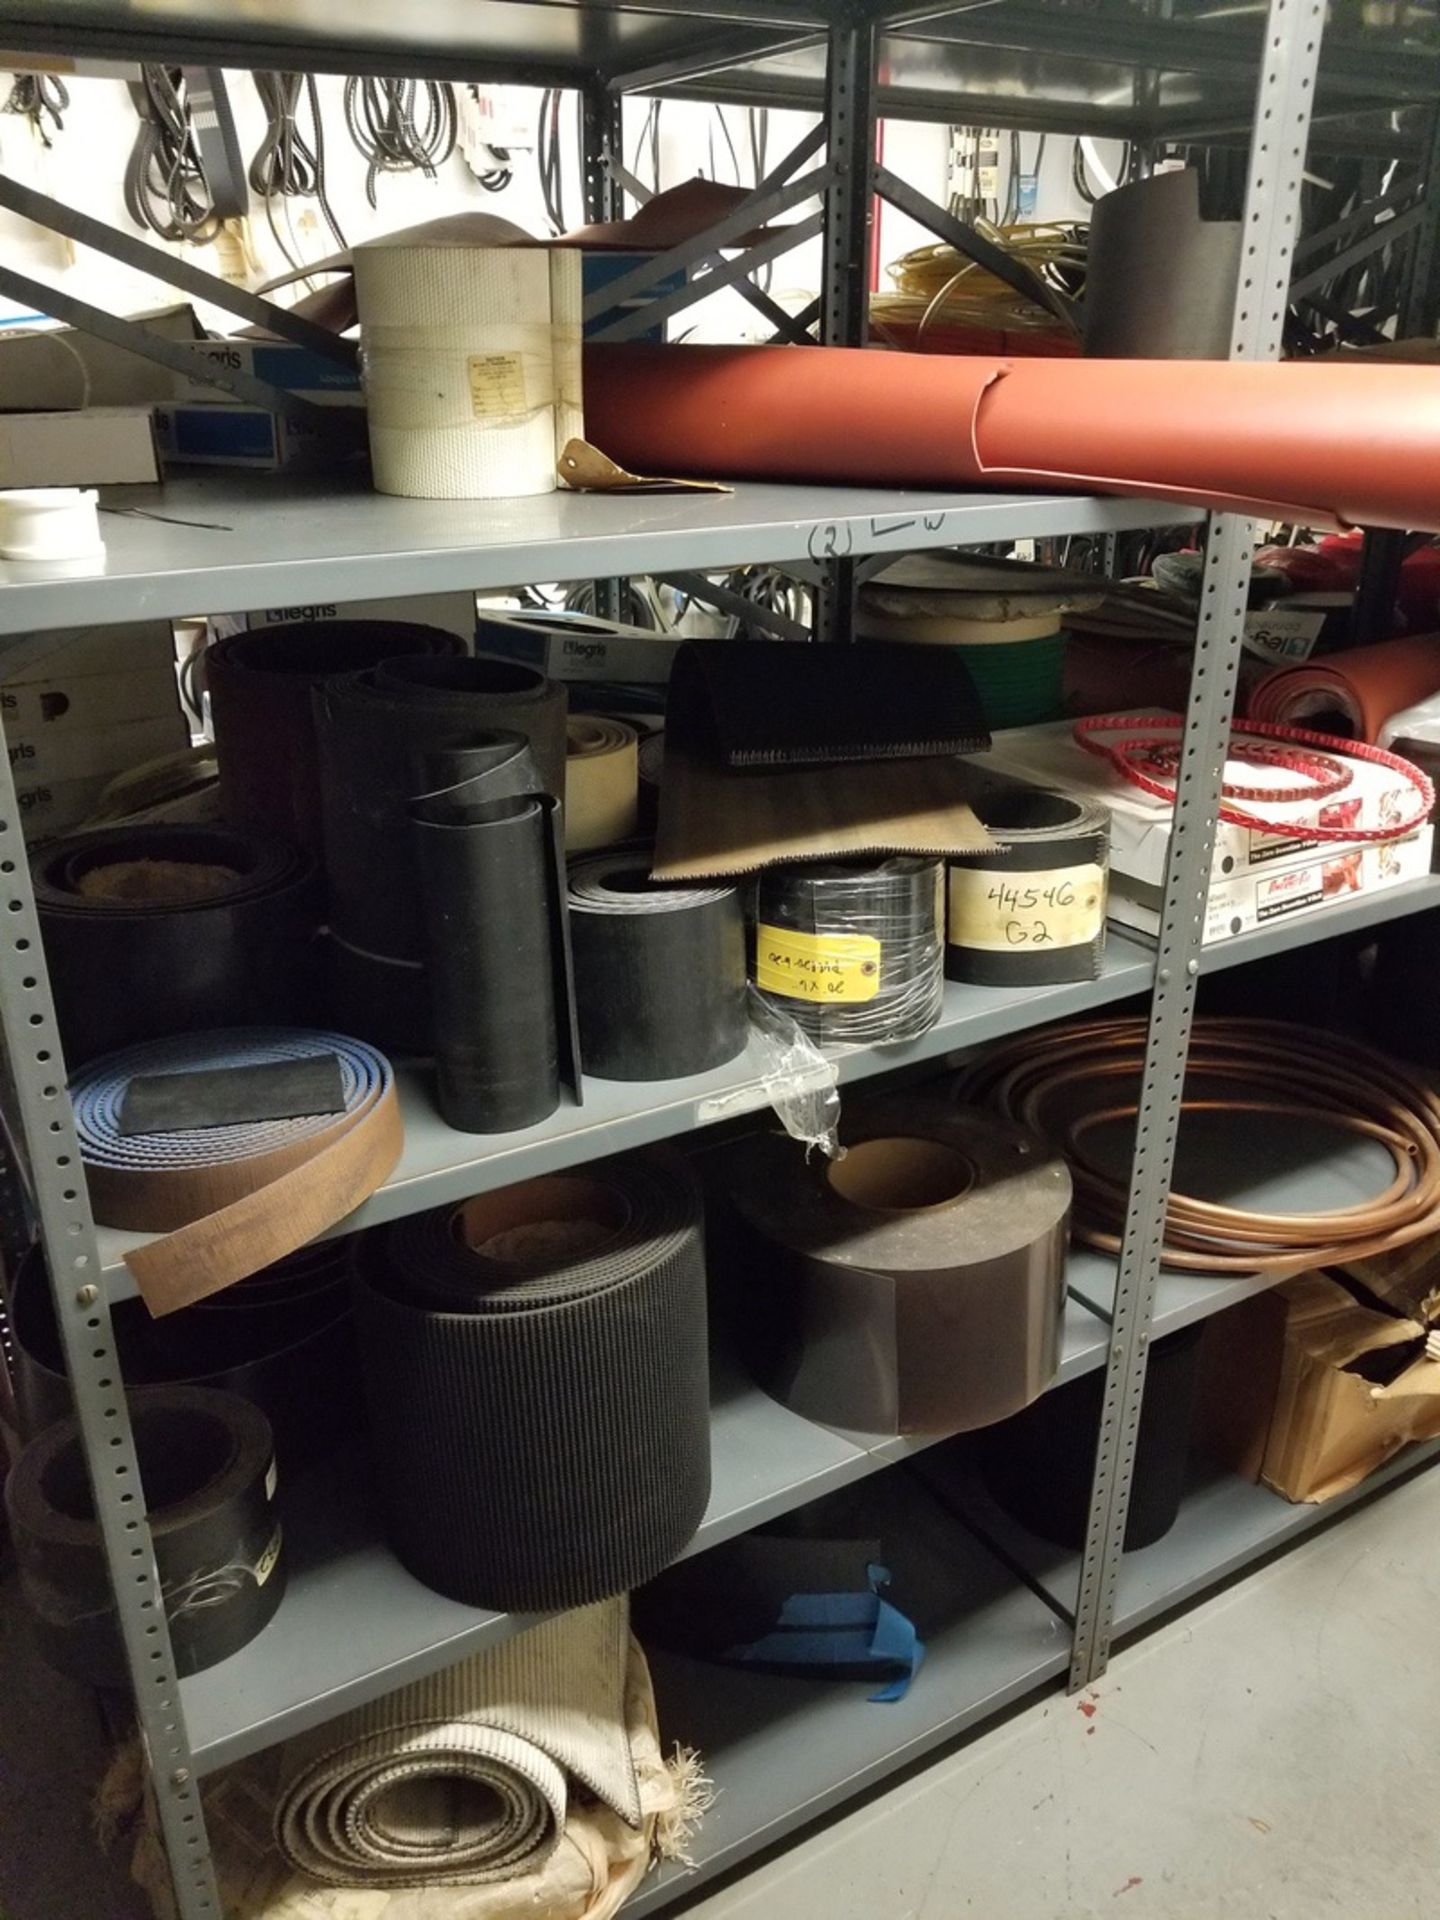 Contents of Belts and Hoses Room (Shelves Not Inlcuded) - Image 8 of 13